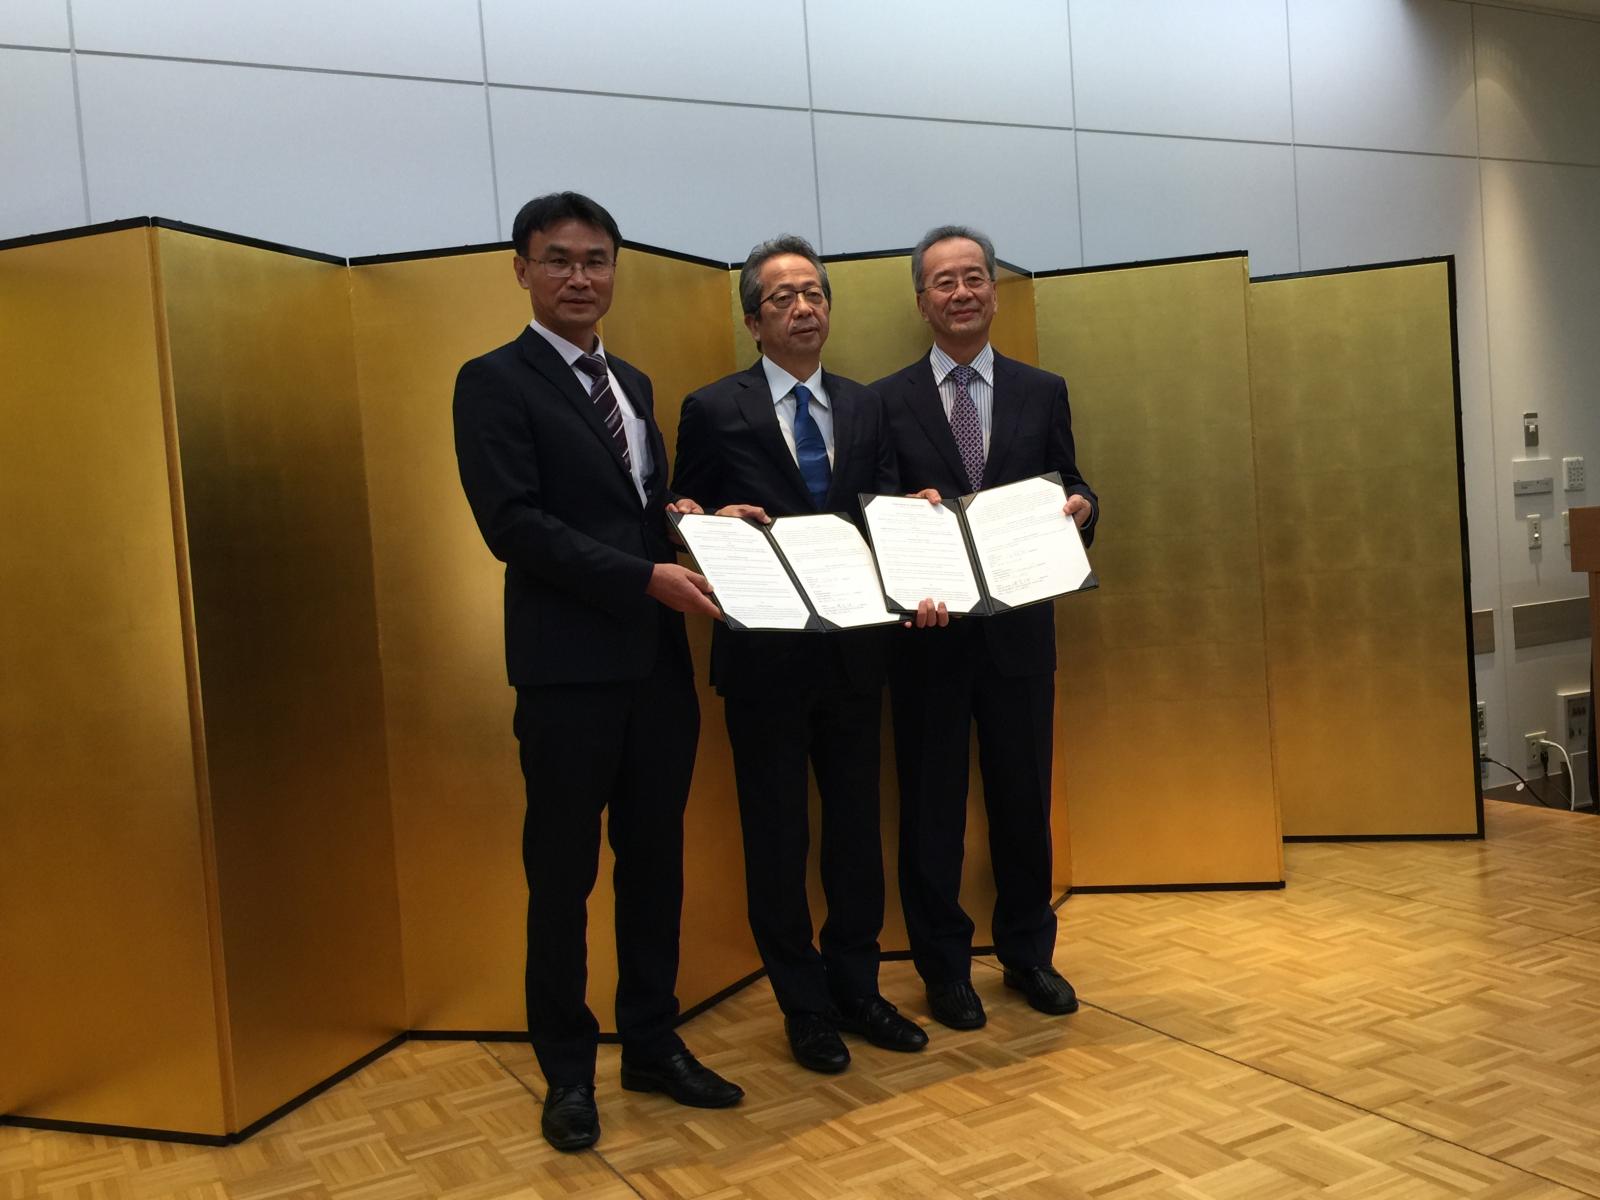 Taiwan’s government is happy to see MITAGRI sign a Memorandum of Cooperation with the Farmind Corporation, a major sales channel into Japan, and they believe that we will soon see even more exports of premium Taiwan agriproducts to Japan, thereby raising farmers’ incomes.